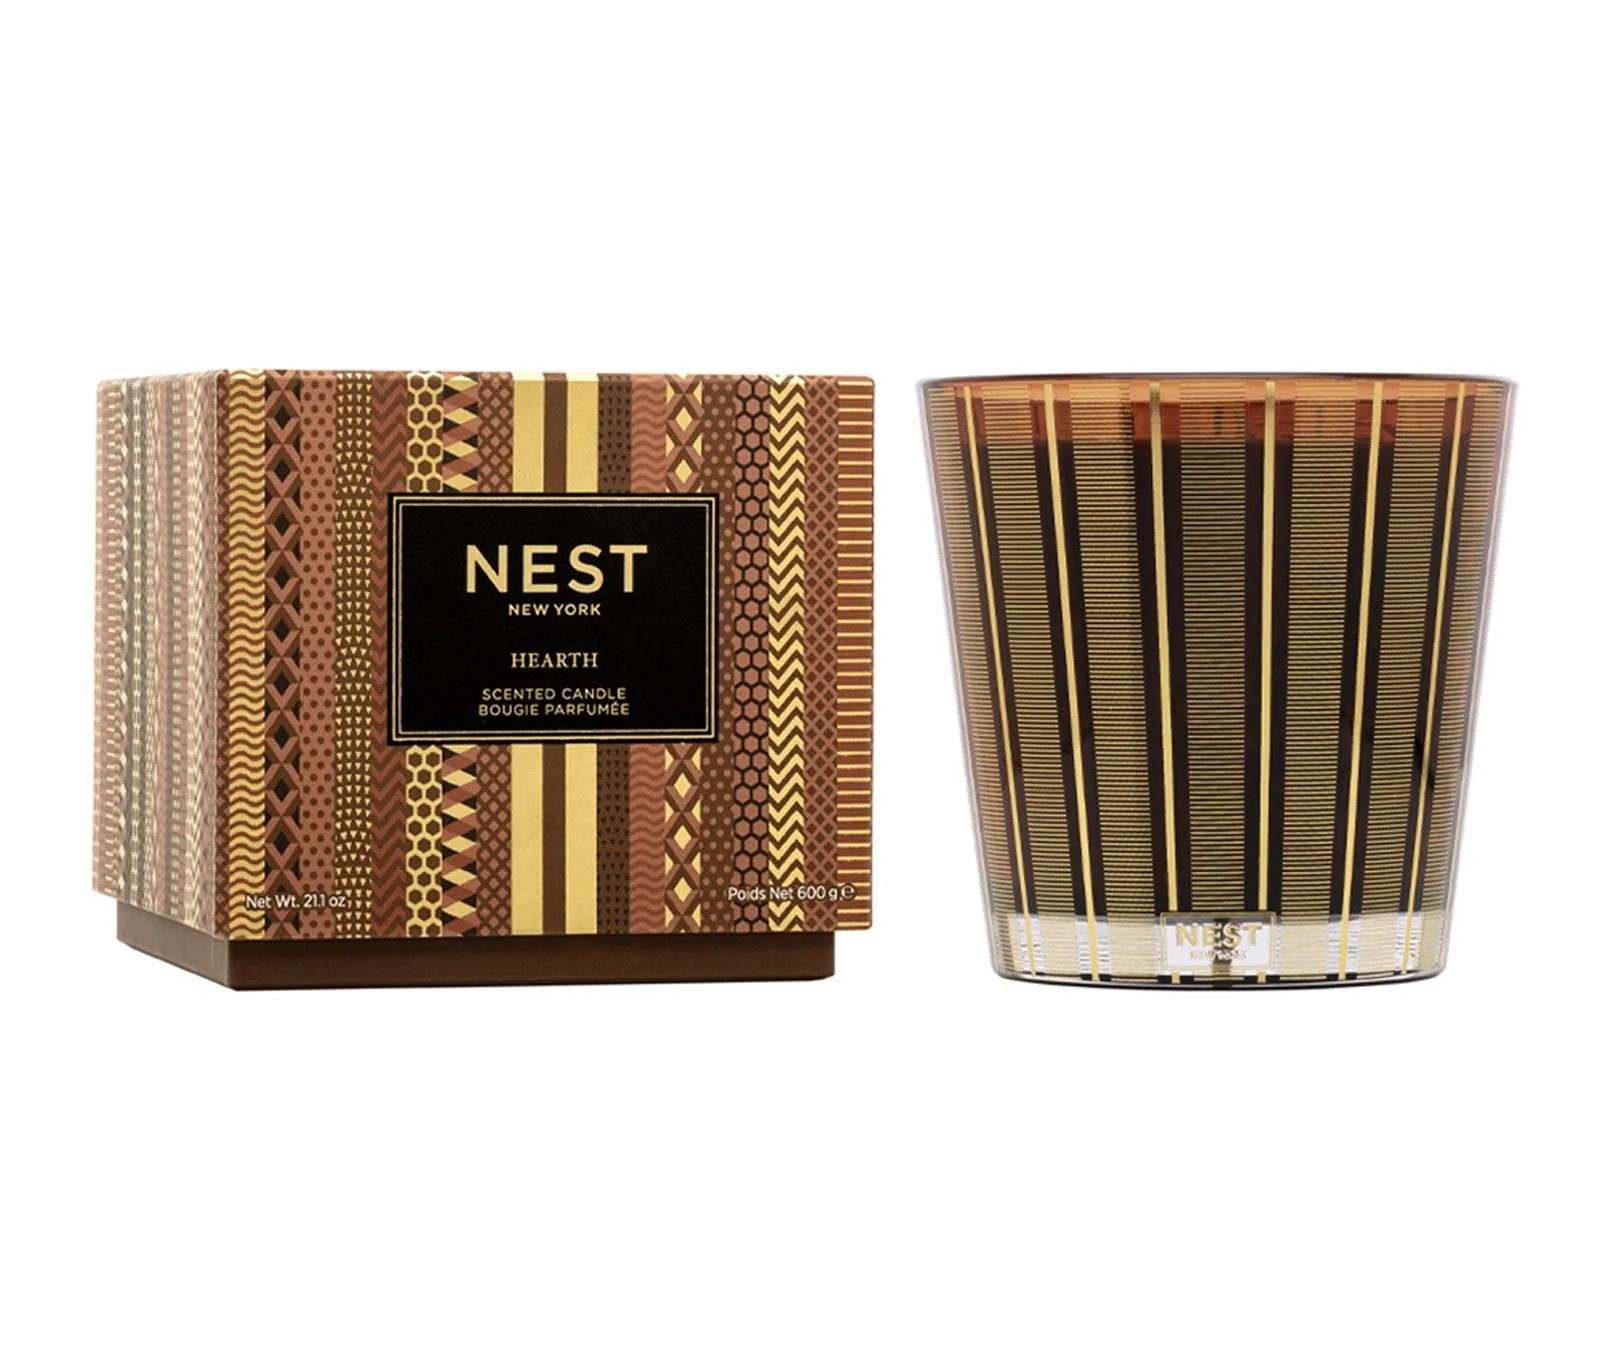 Hearth 3-Wick Candle | NEST Fragrances